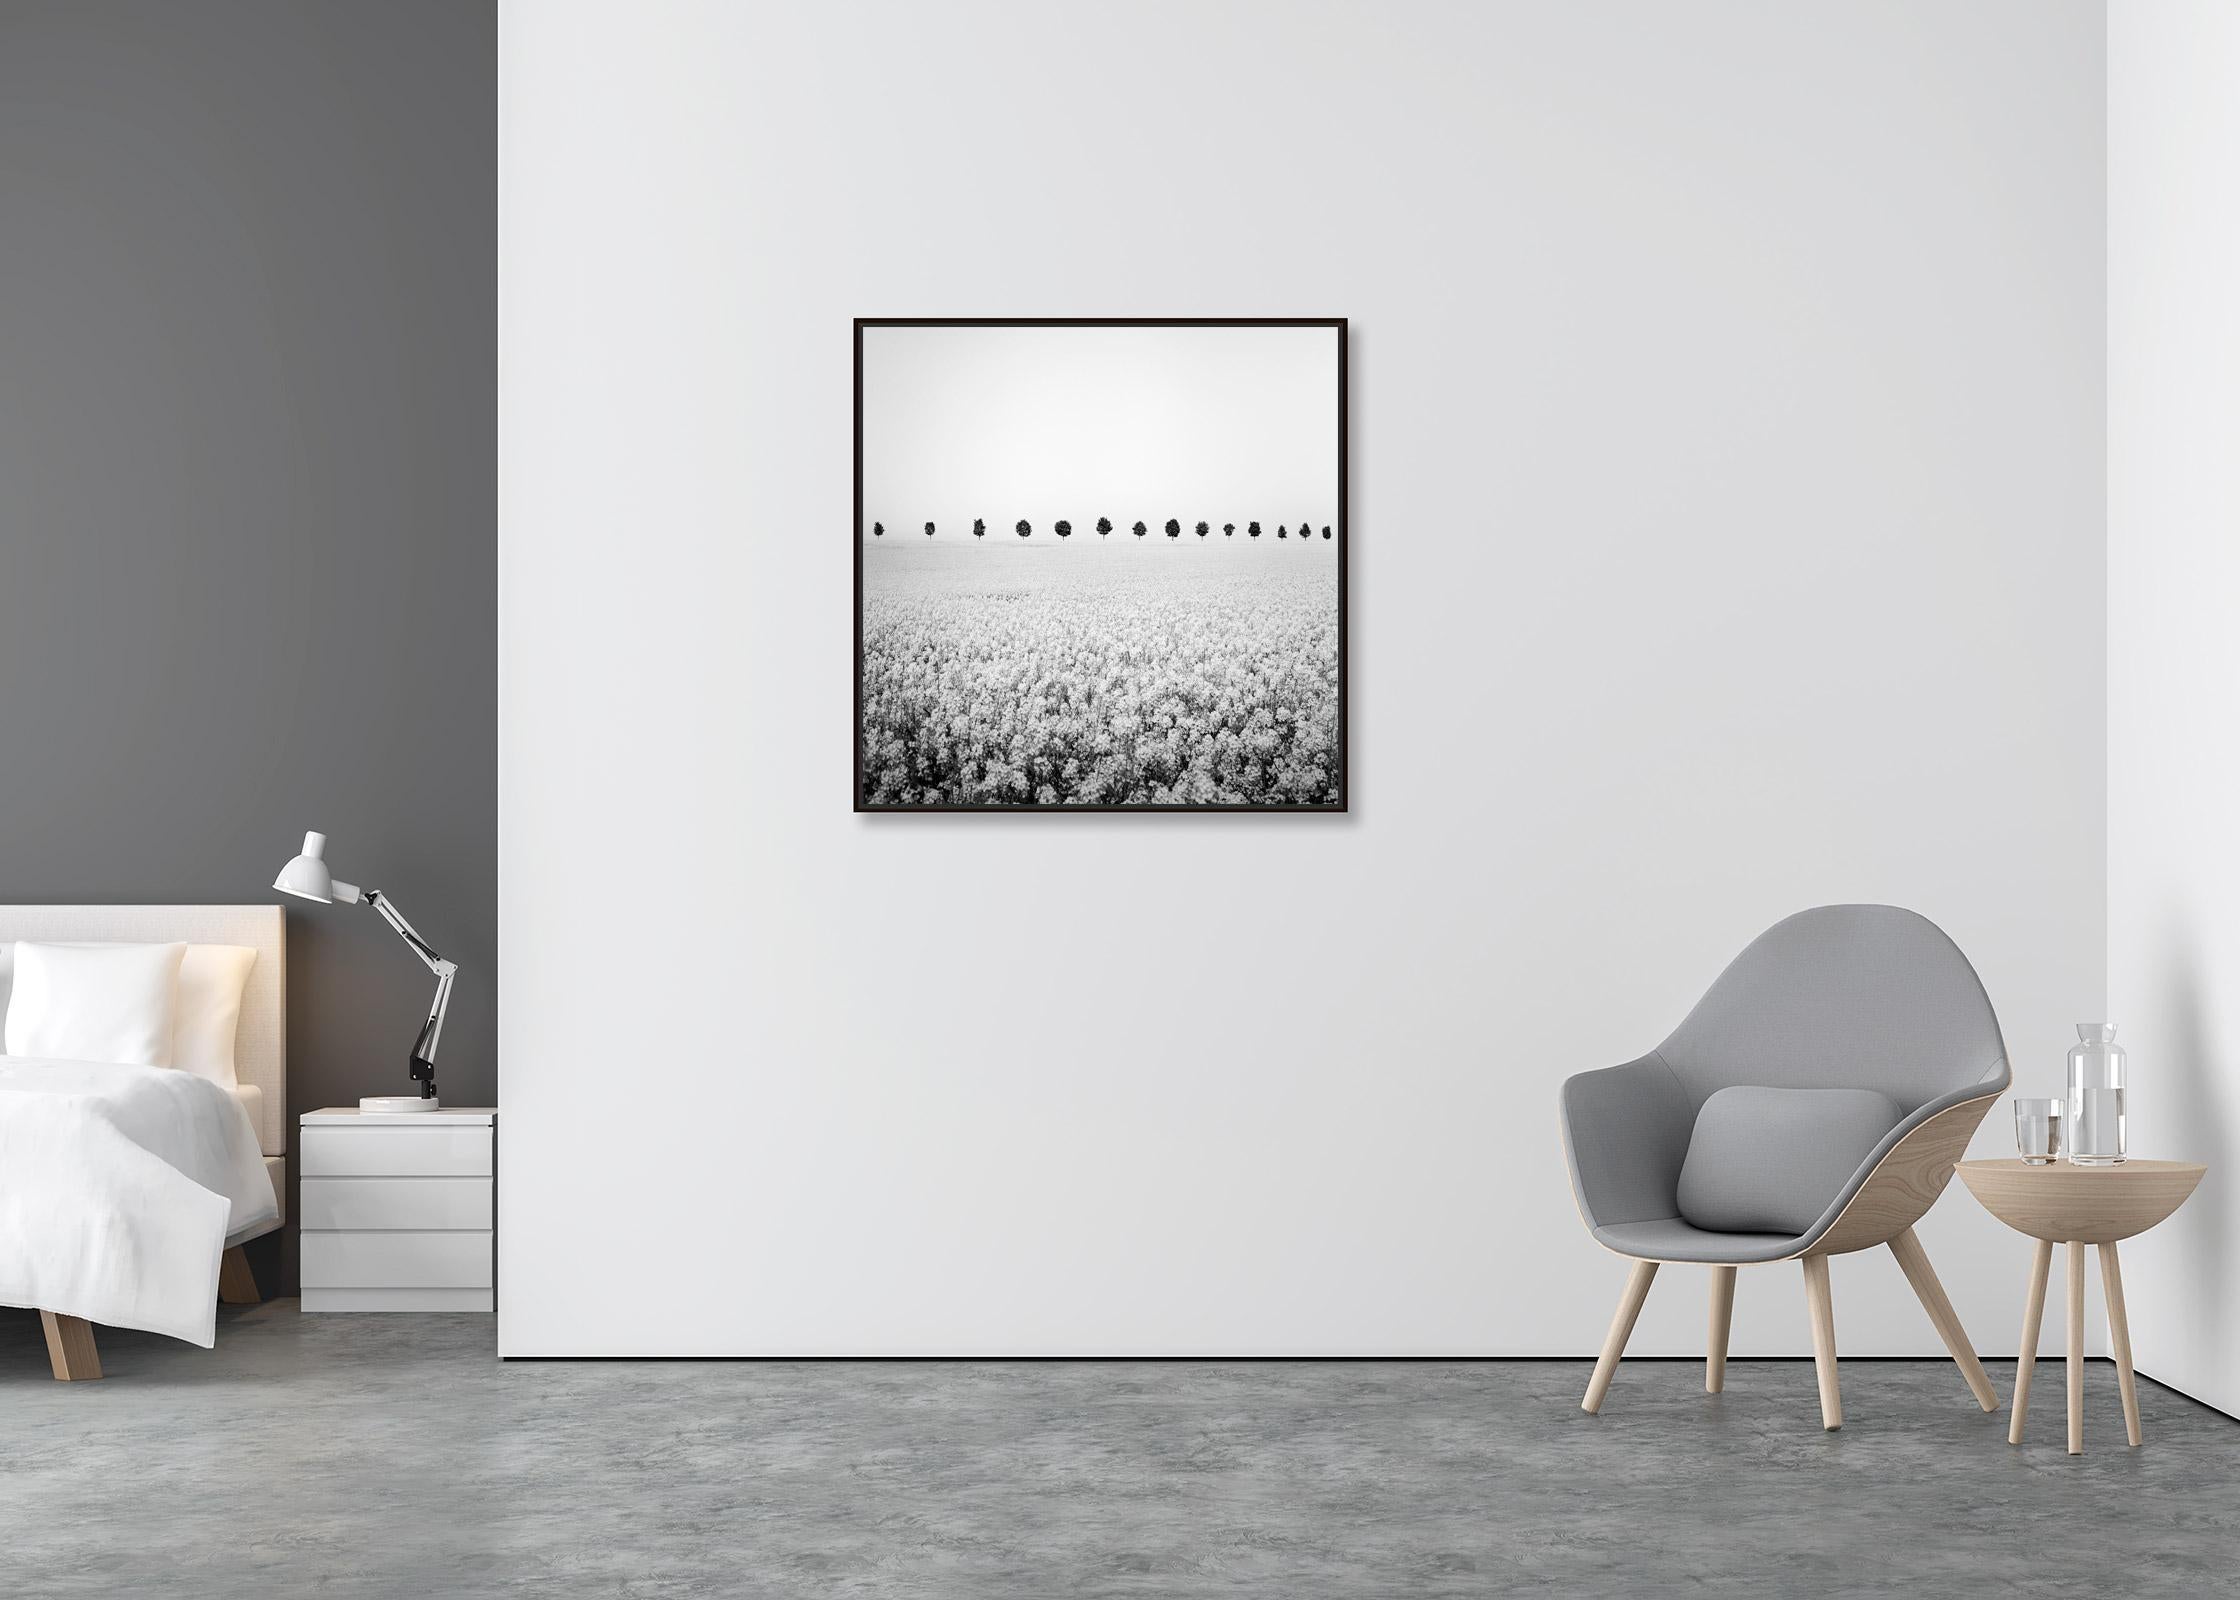 Brassica Napus, Tree Avenue, Rapeseed Field, black and white art photography - Contemporary Photograph by Gerald Berghammer